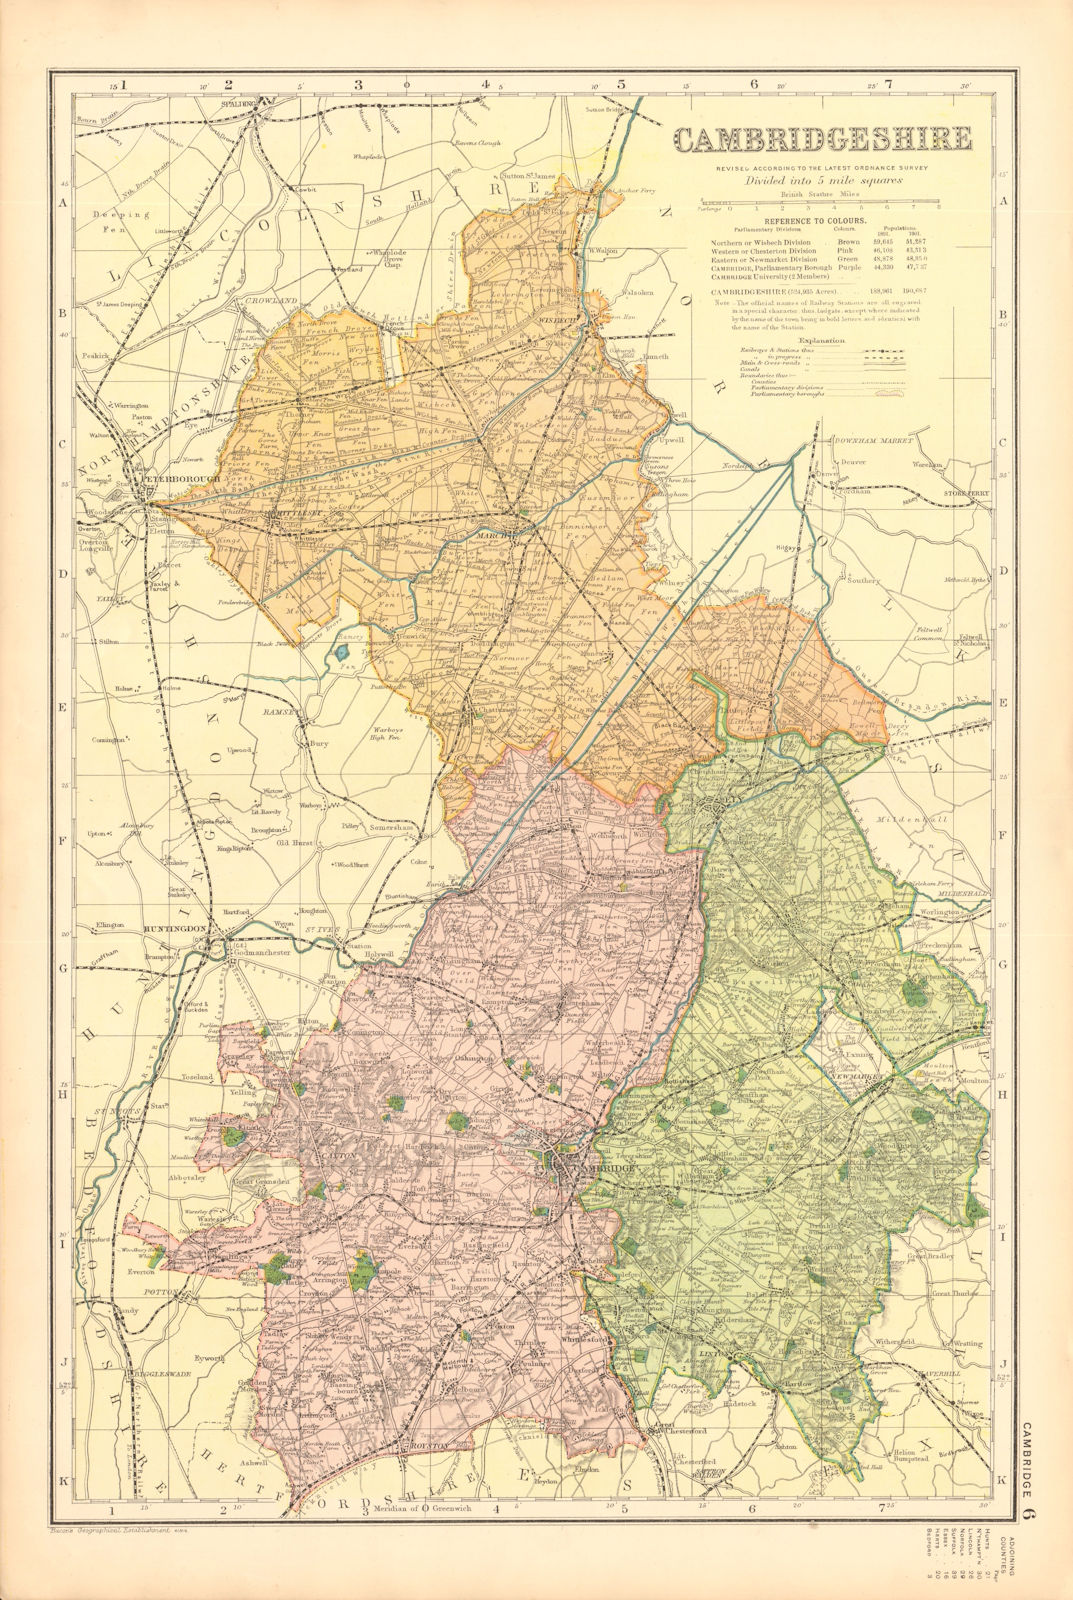 CAMBRIDGESHIRE. Showing Parliamentary divisions,boroughs & parks.BACON 1904 map